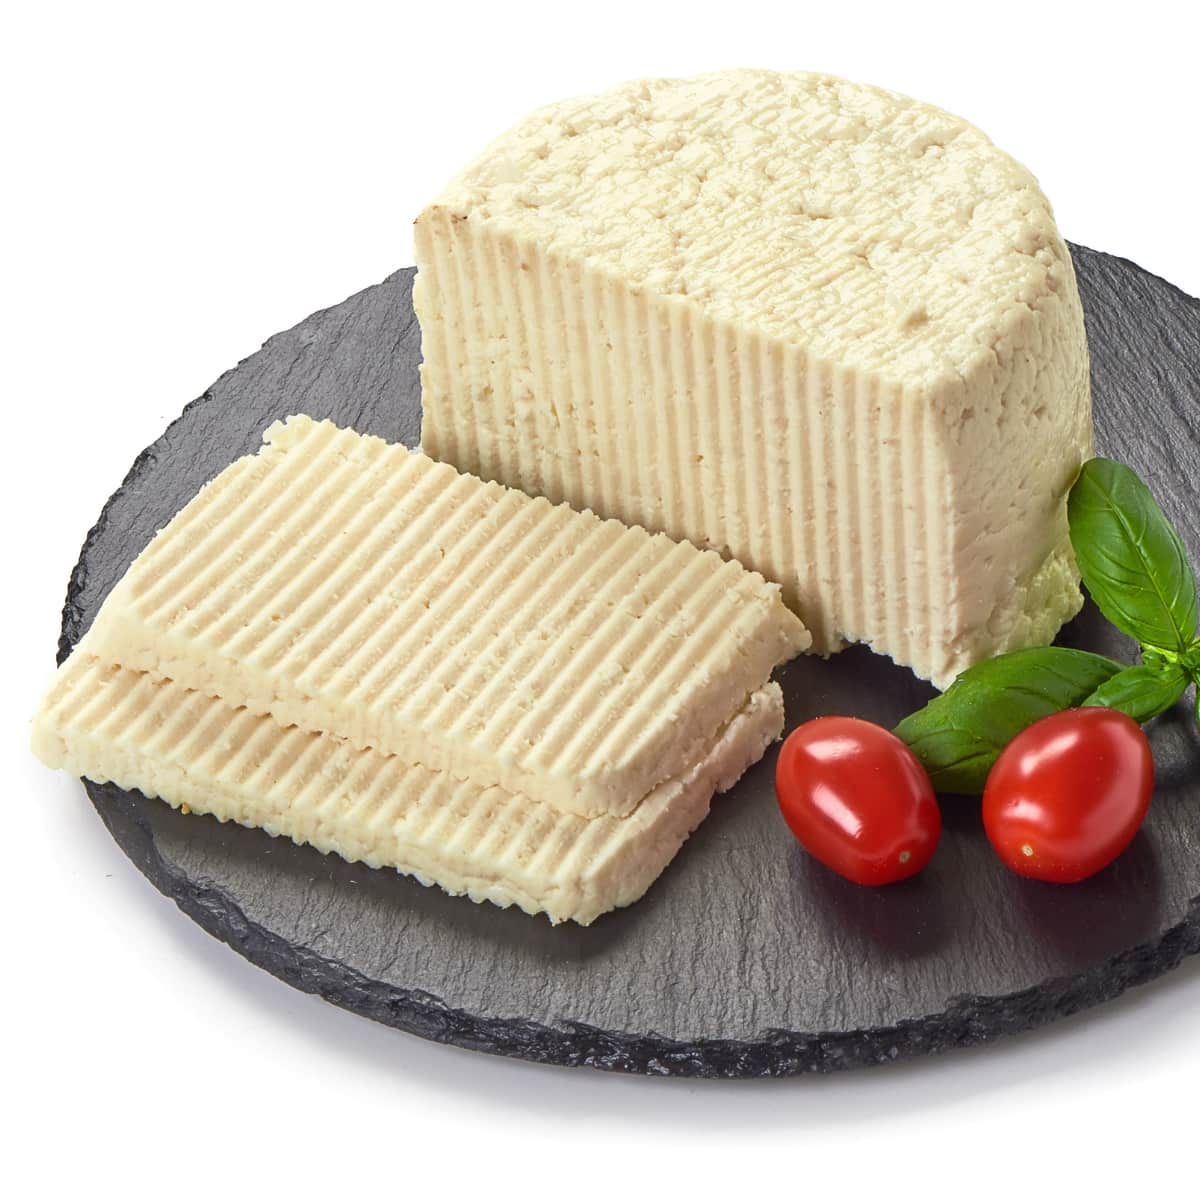 Raw Organic Havarti Cheese and Slices on a Slate Cutting Board with Basil and Tomatoes